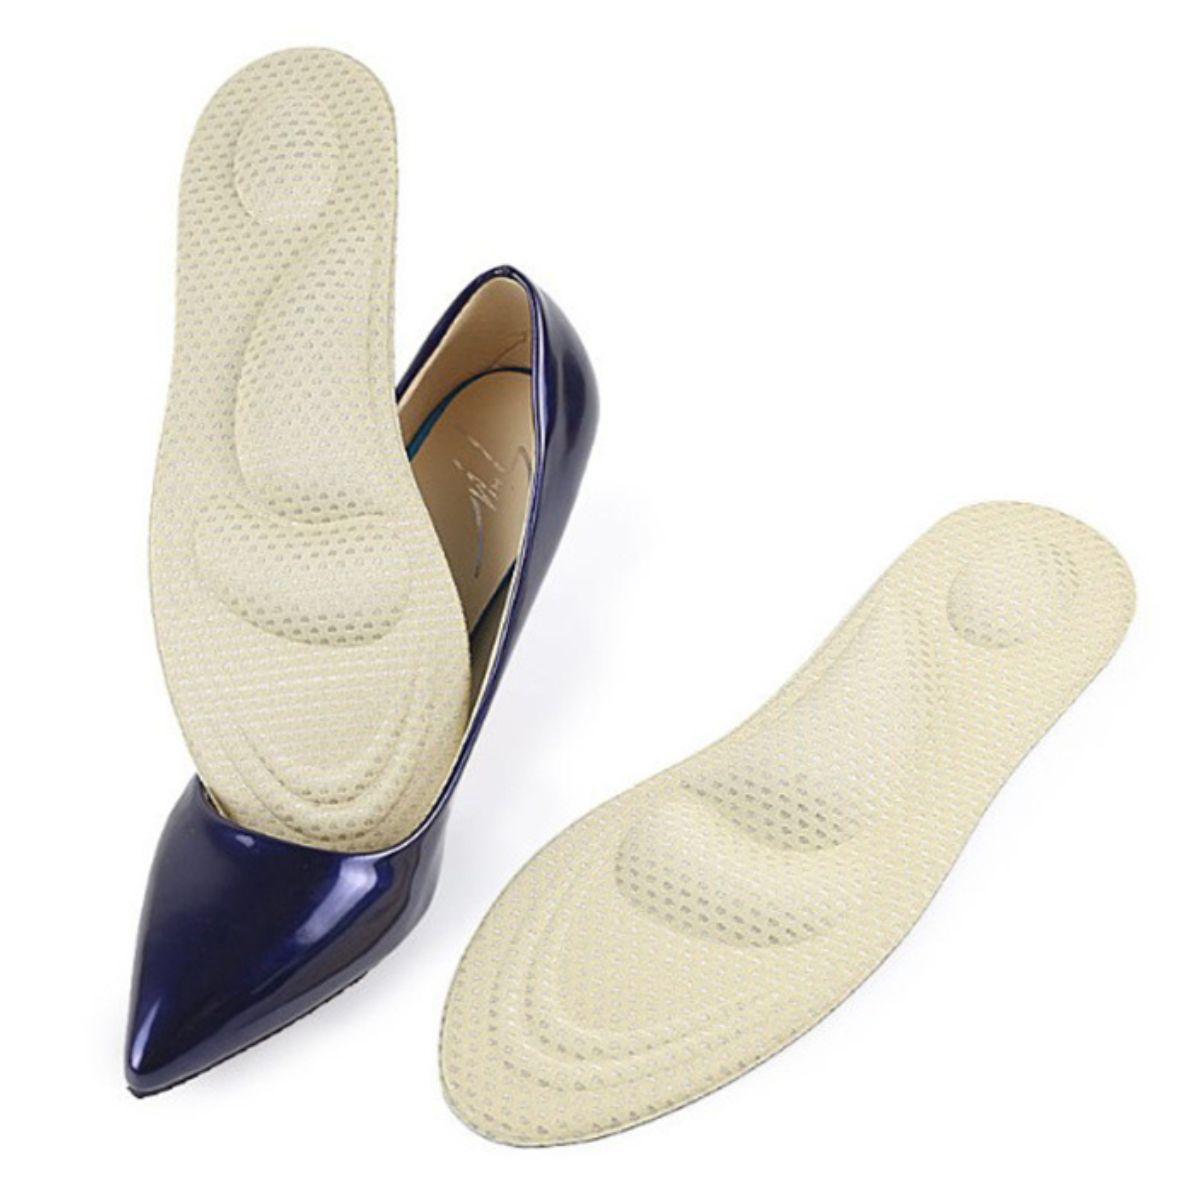 Foot Sole Comfort - tcistarhealthproducts